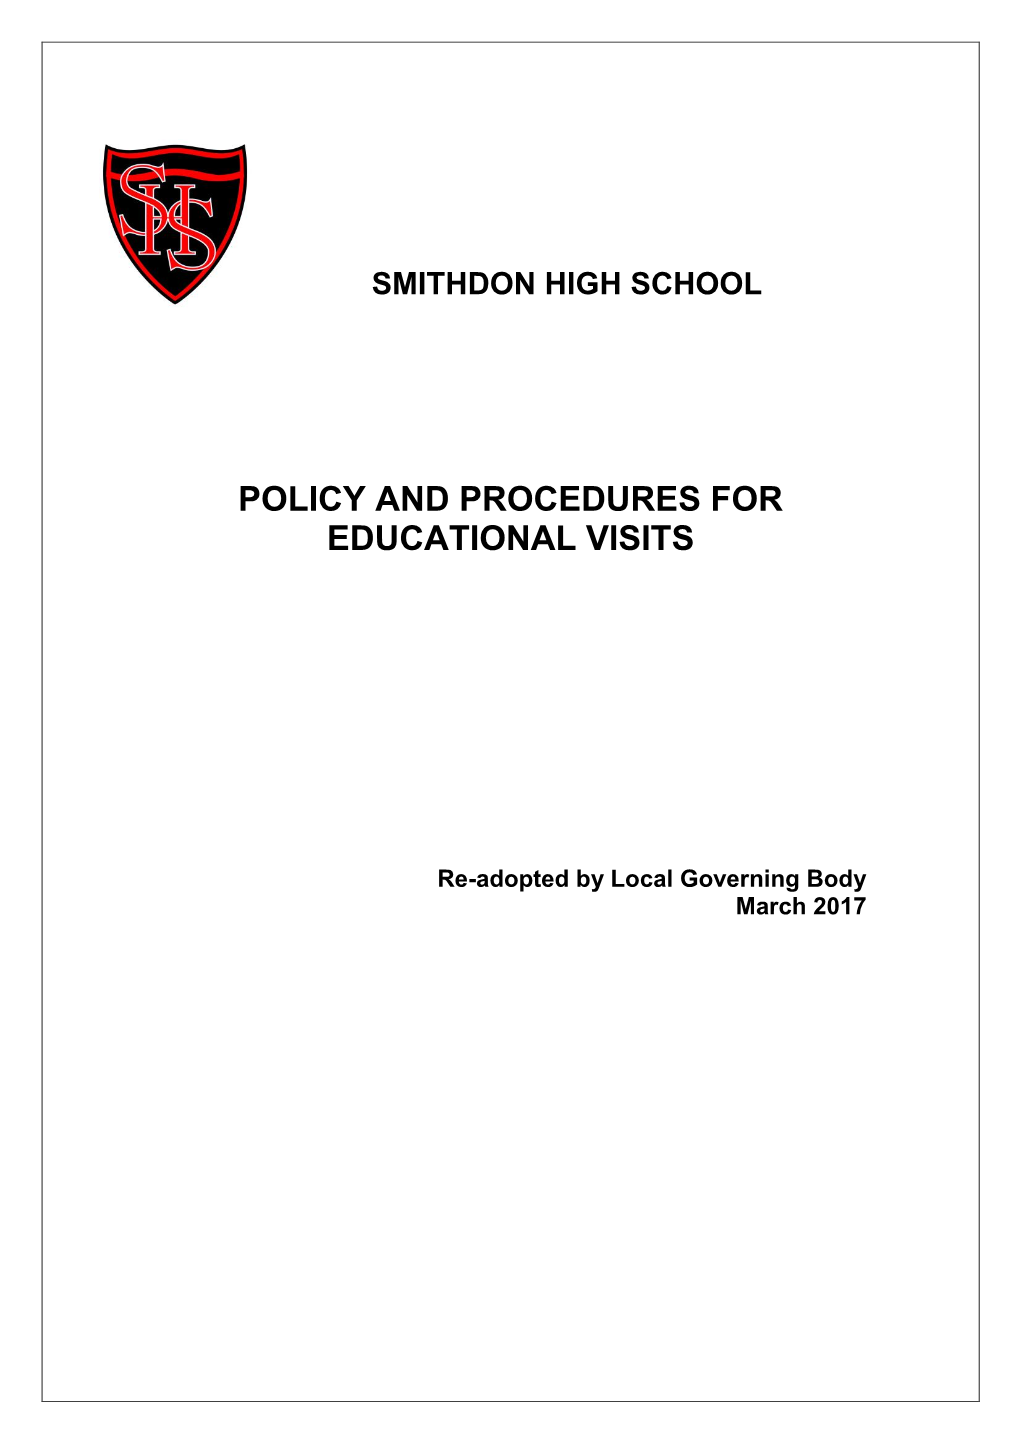 Smithdon High School Policy and Procedures for Educational Visits